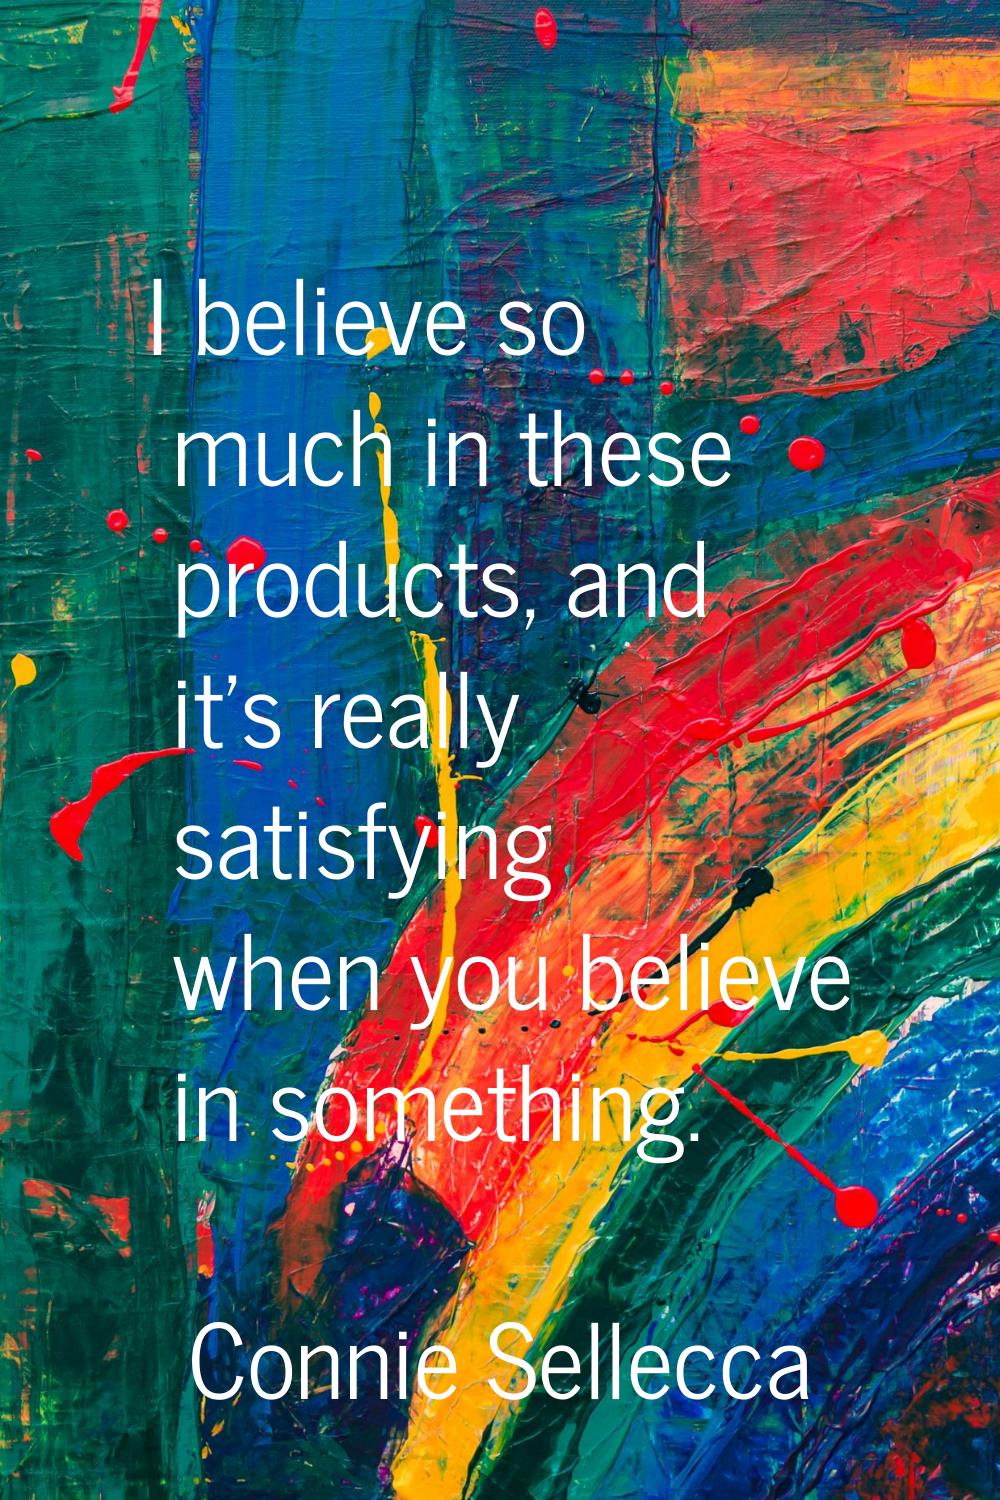 I believe so much in these products, and it's really satisfying when you believe in something.